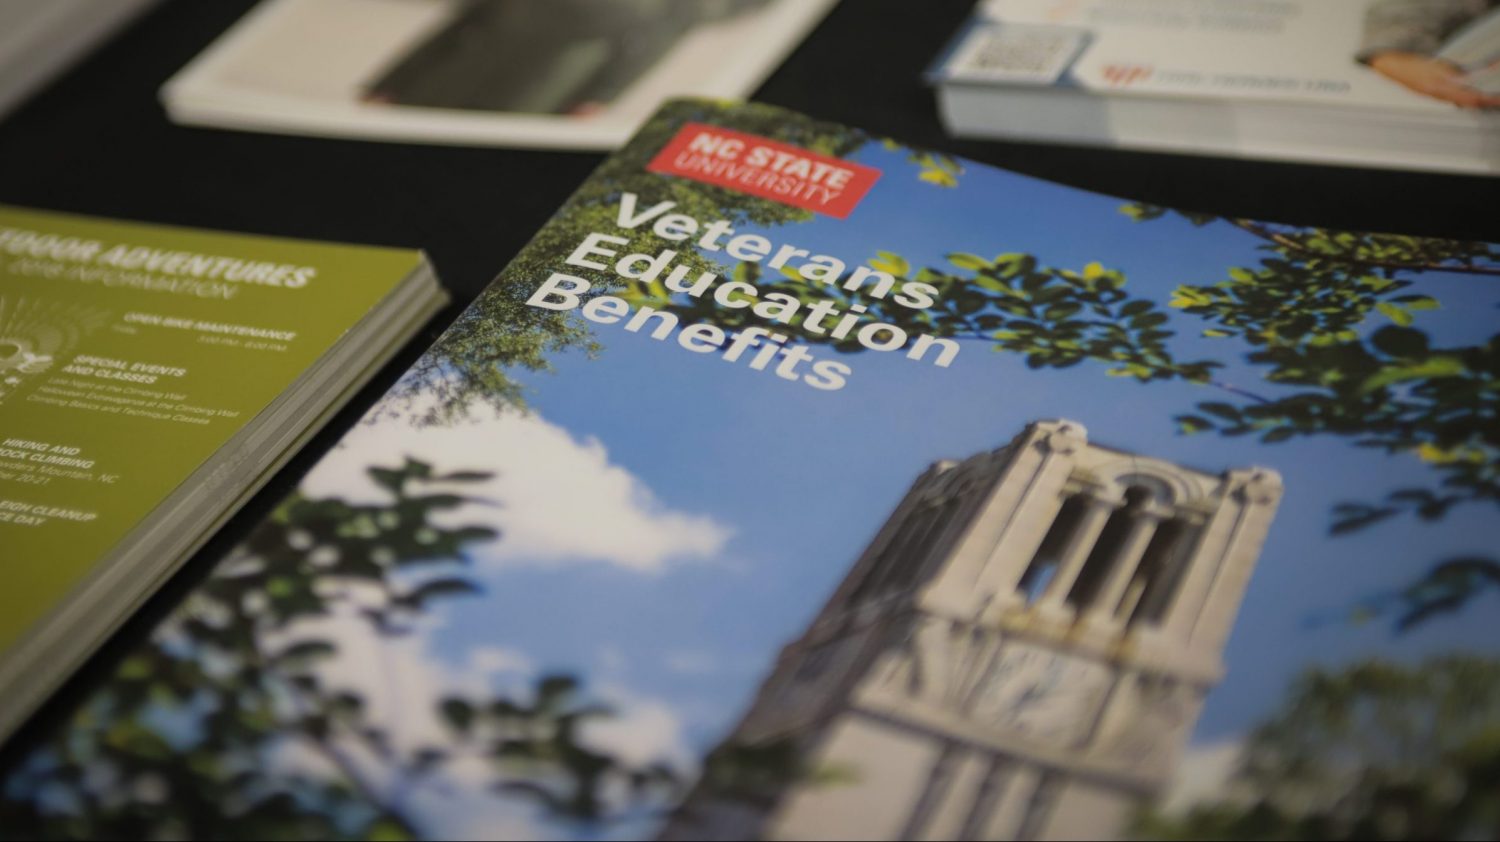 An NC State brochure on veterans education benefits.